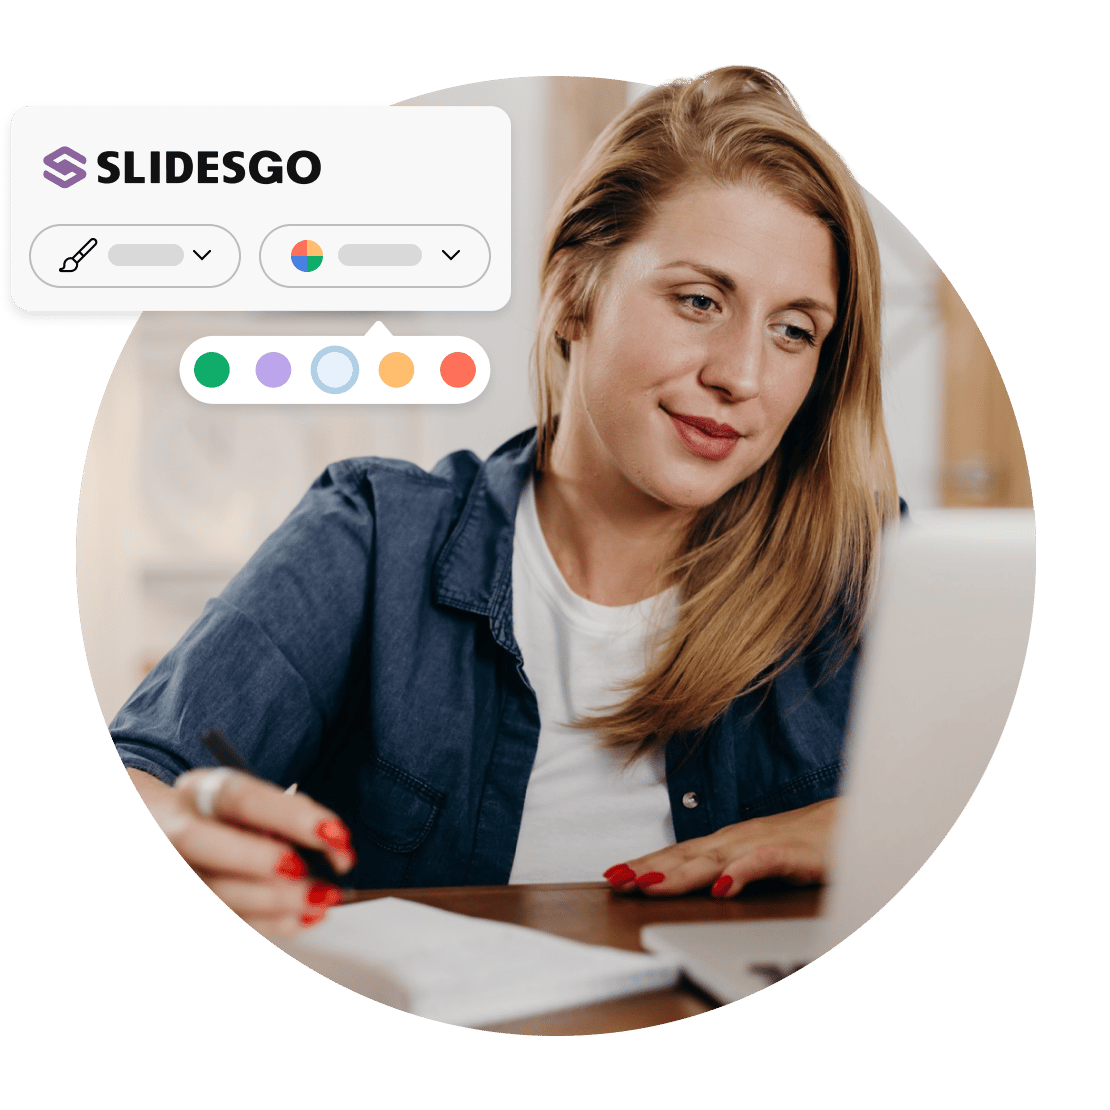 A woman using Slidesgo with a VPN.